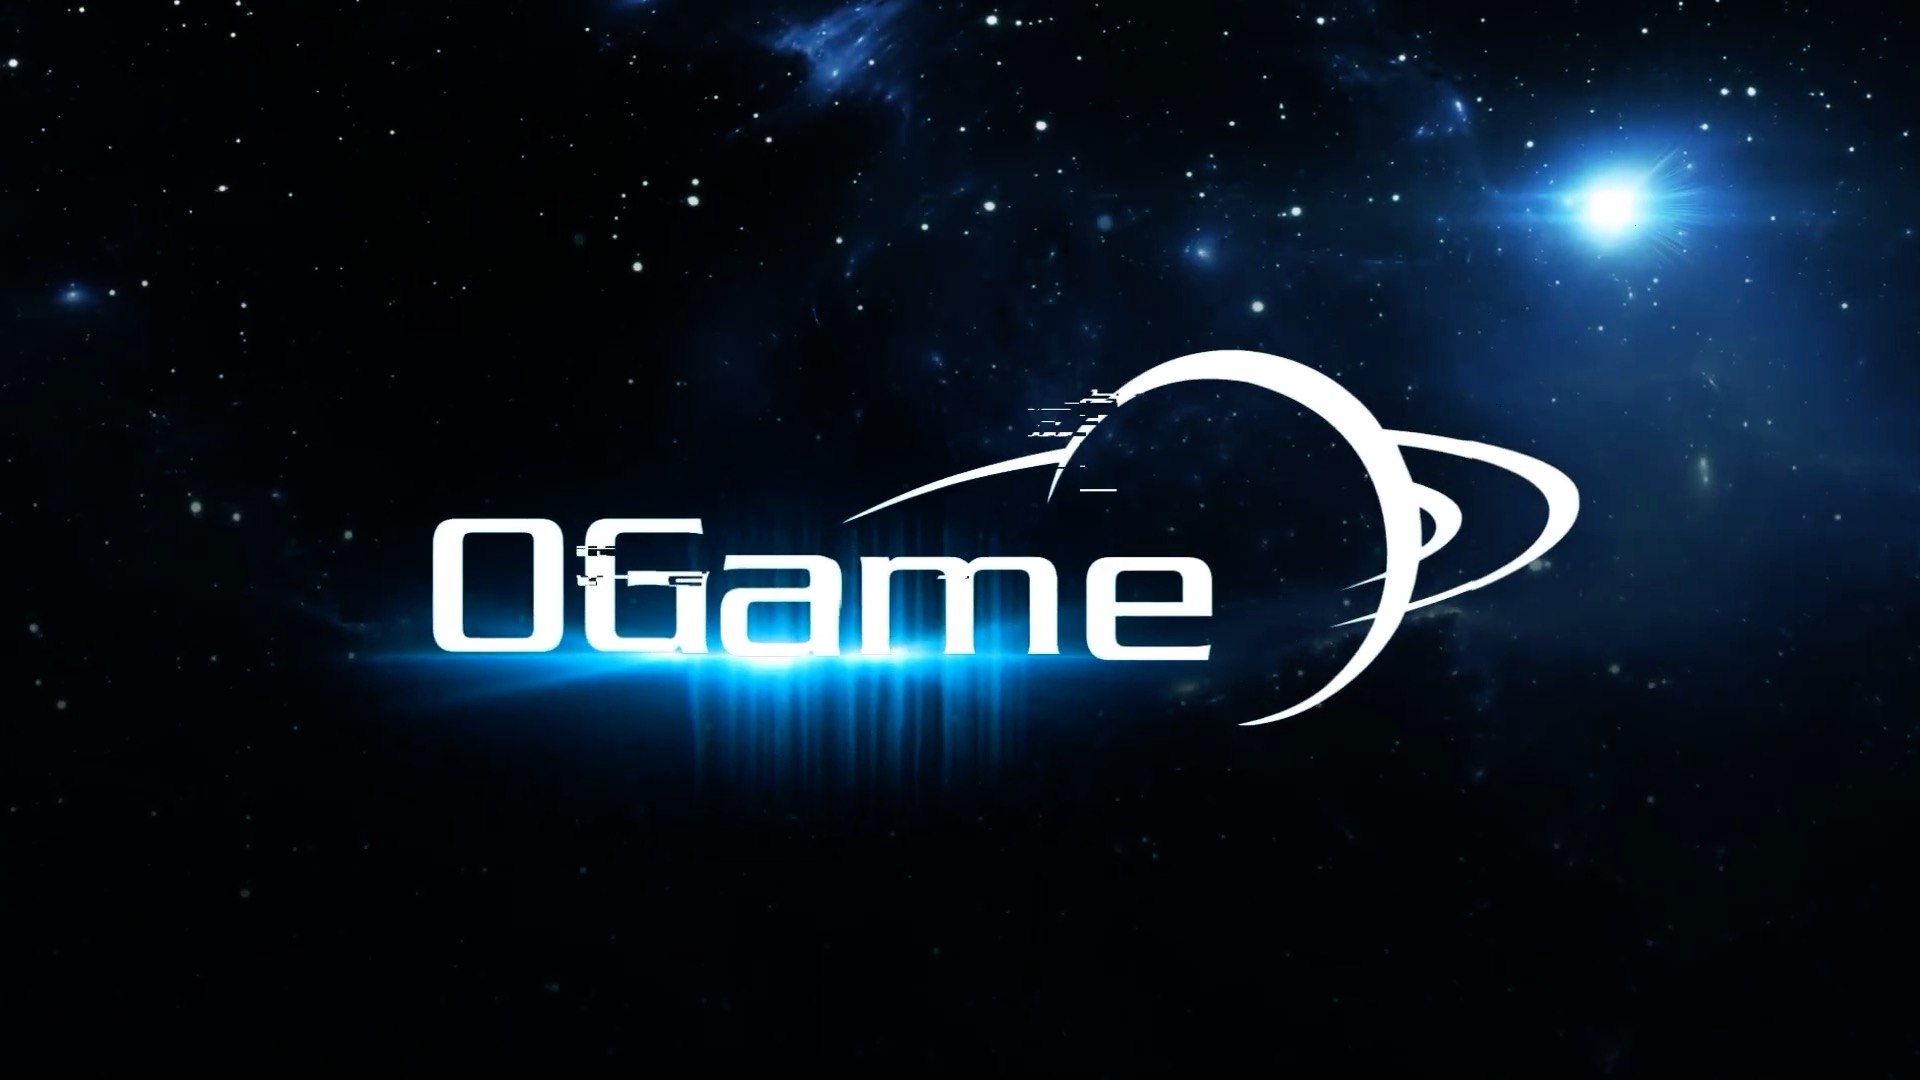 Ogame MMO Space Game